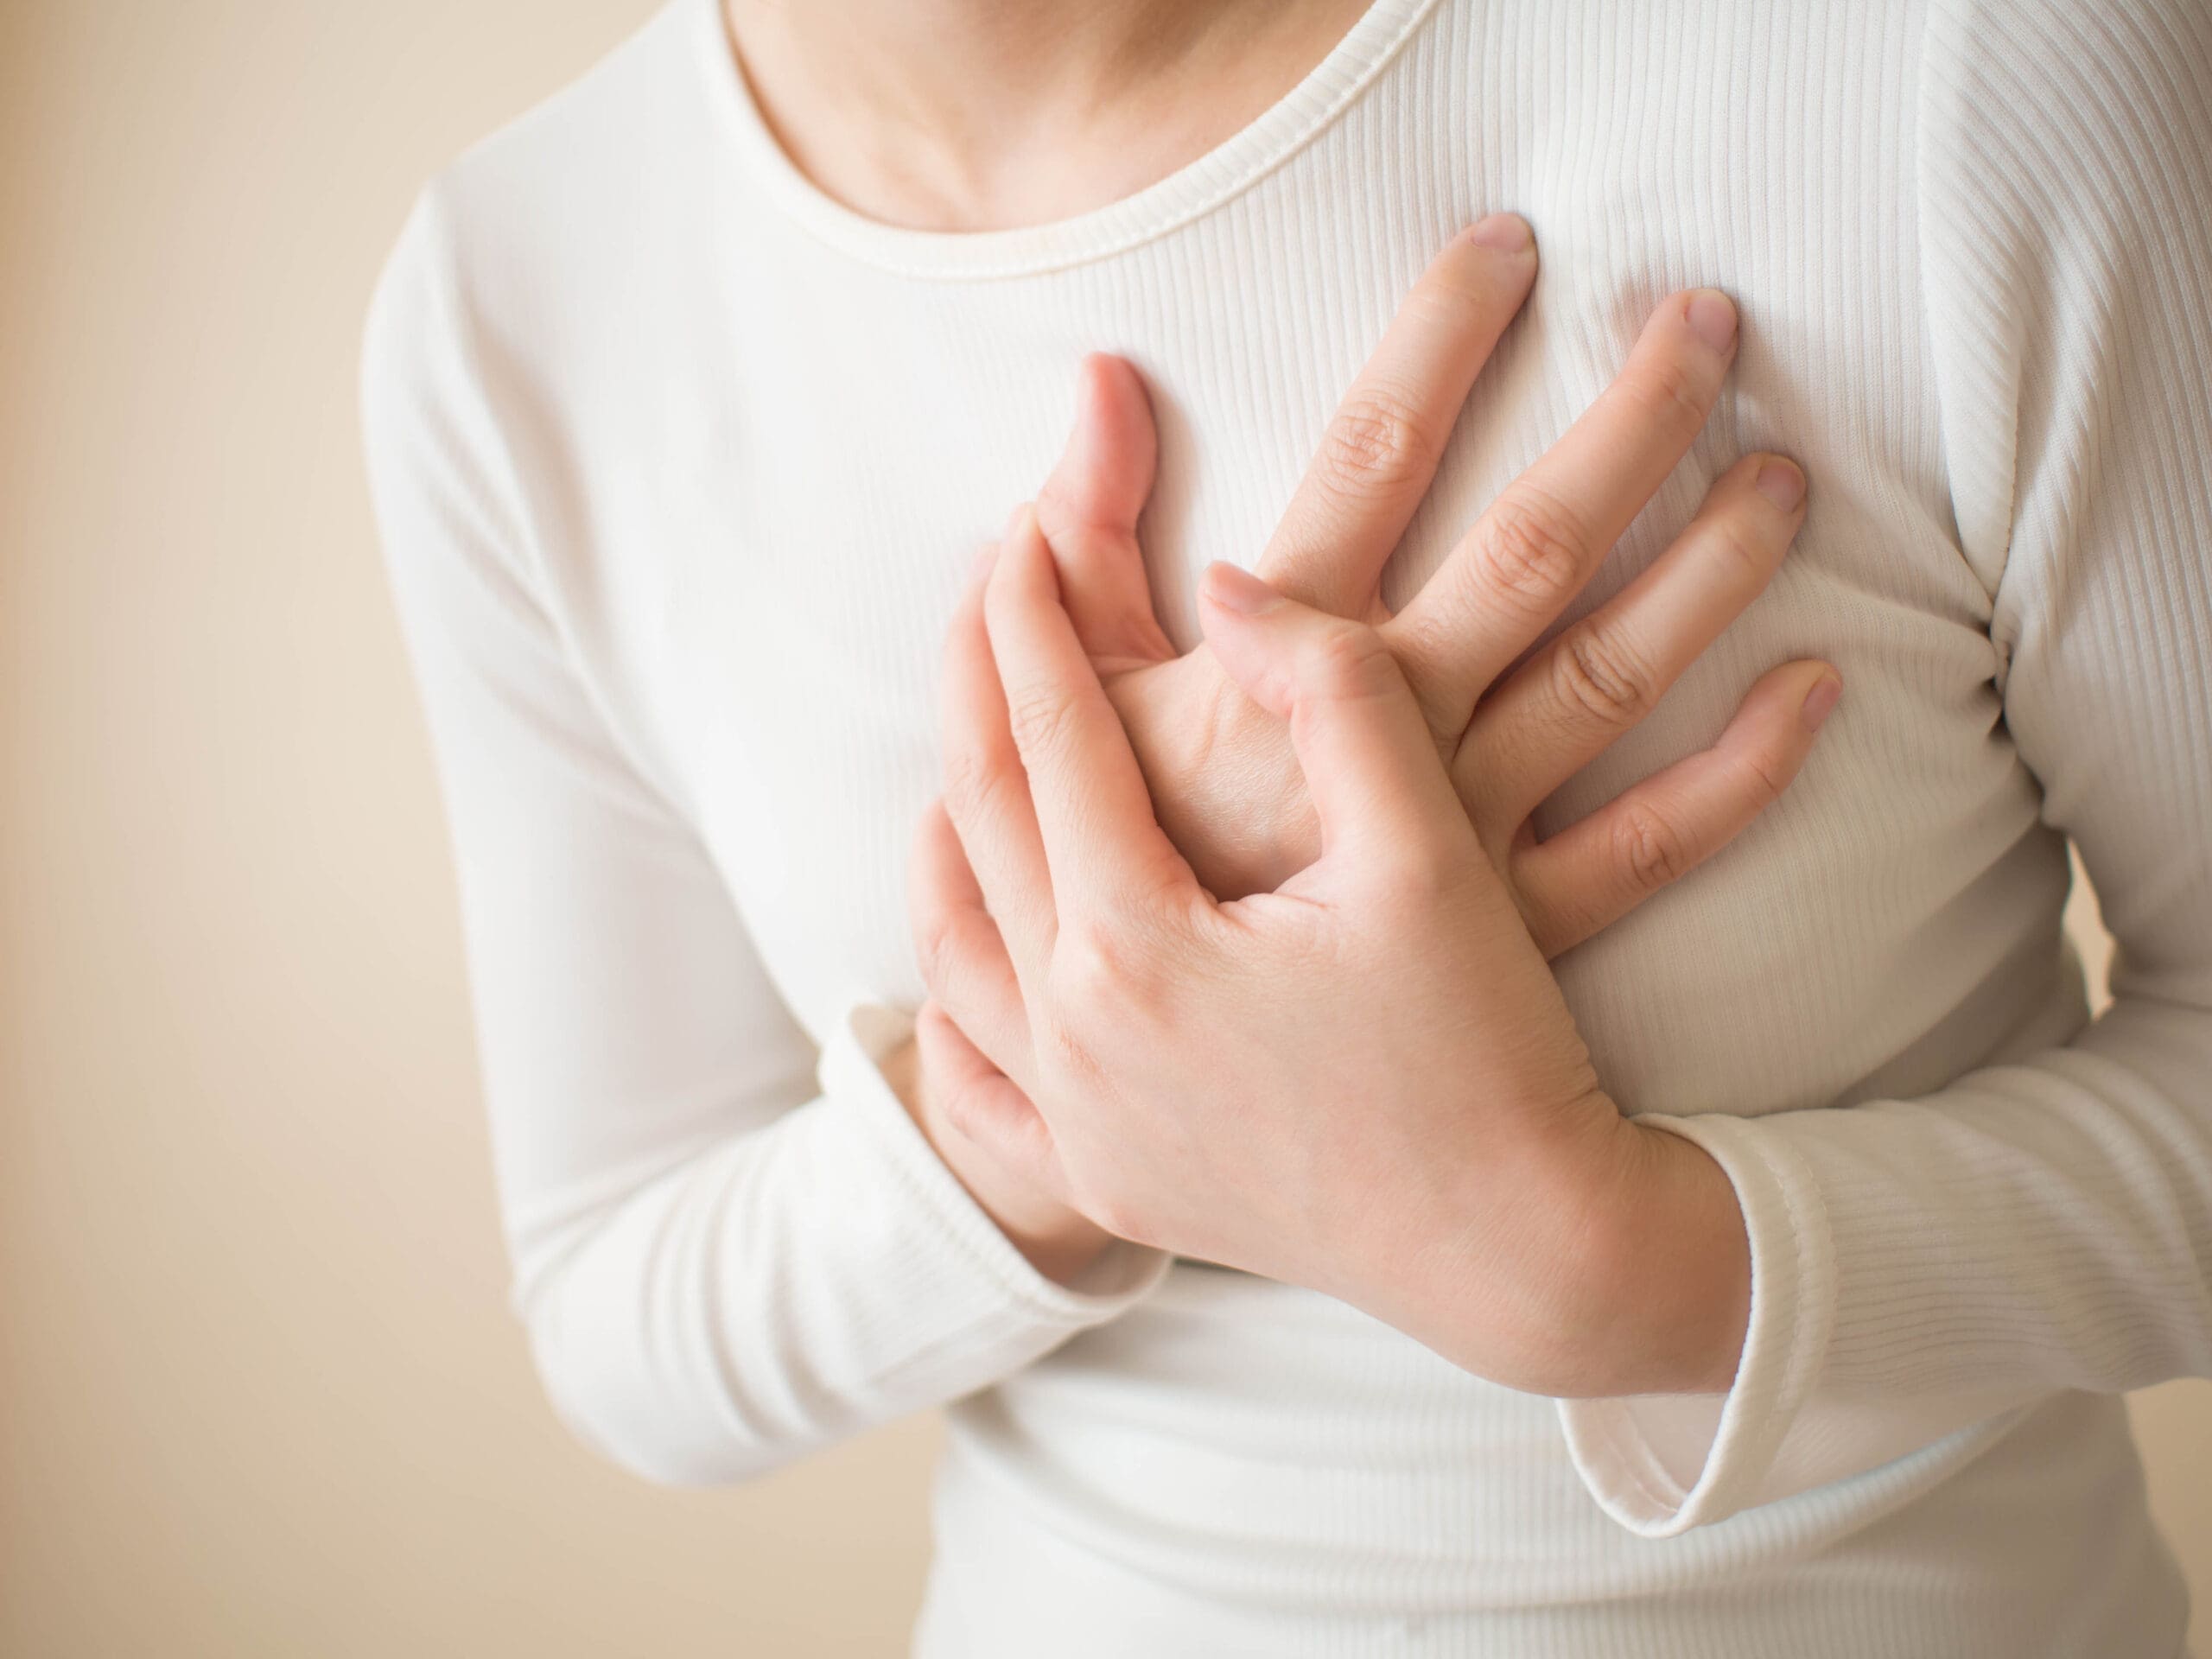 Breast and chest pain